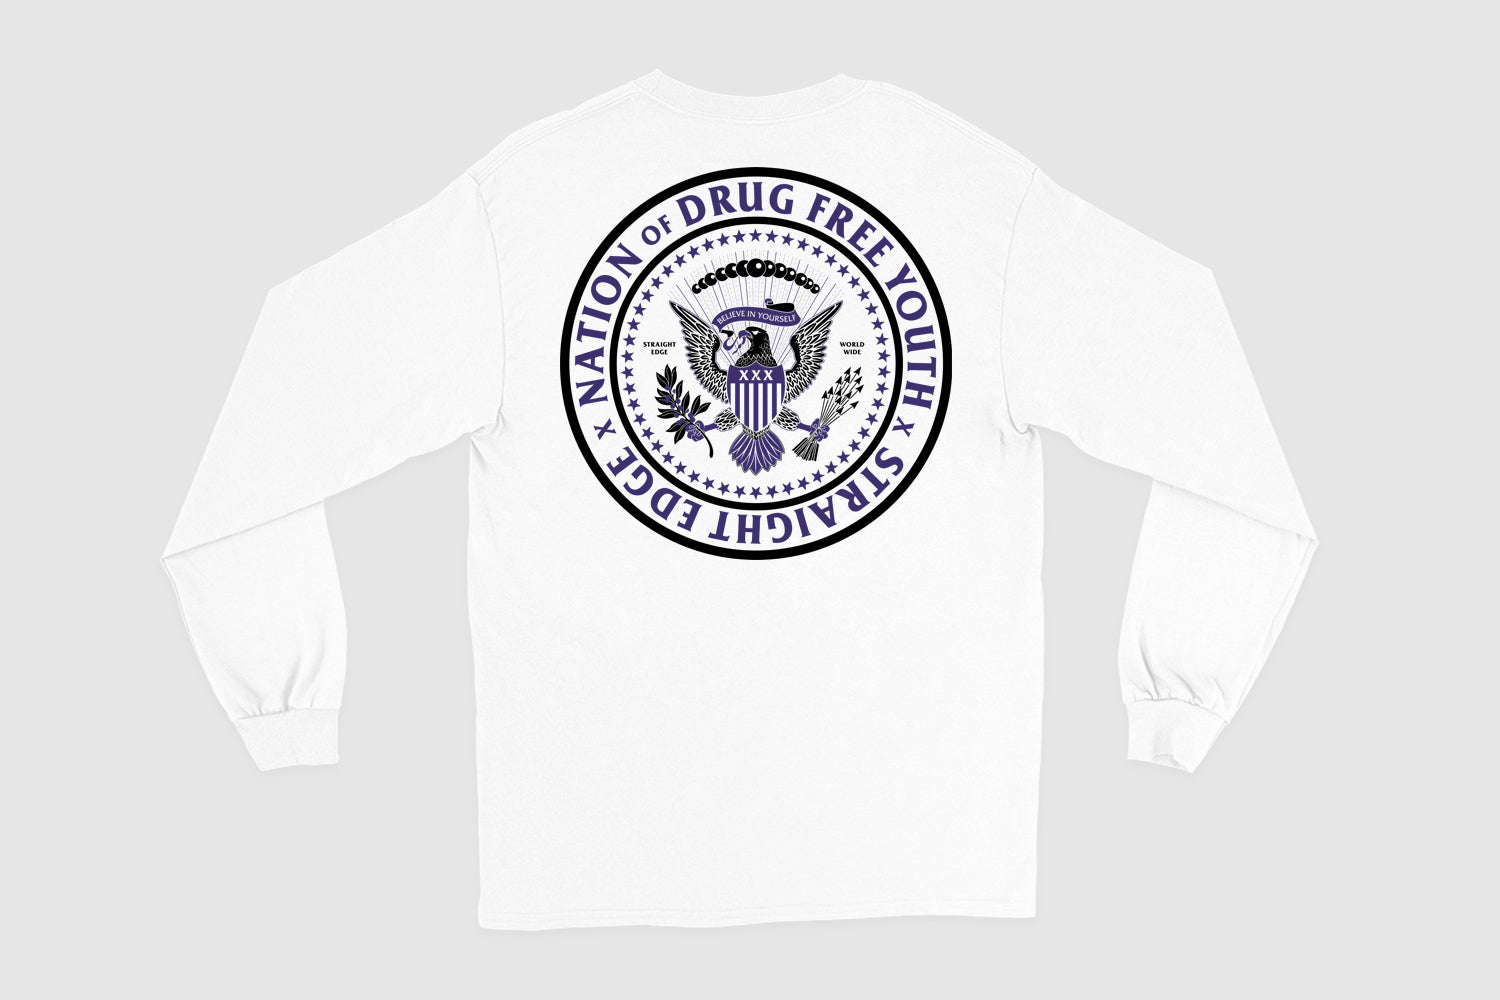 Nation of Drug Free Youth Straight Edge long sleeve t-shirt in white by STRAIGHTEDGEWORLDWIDE